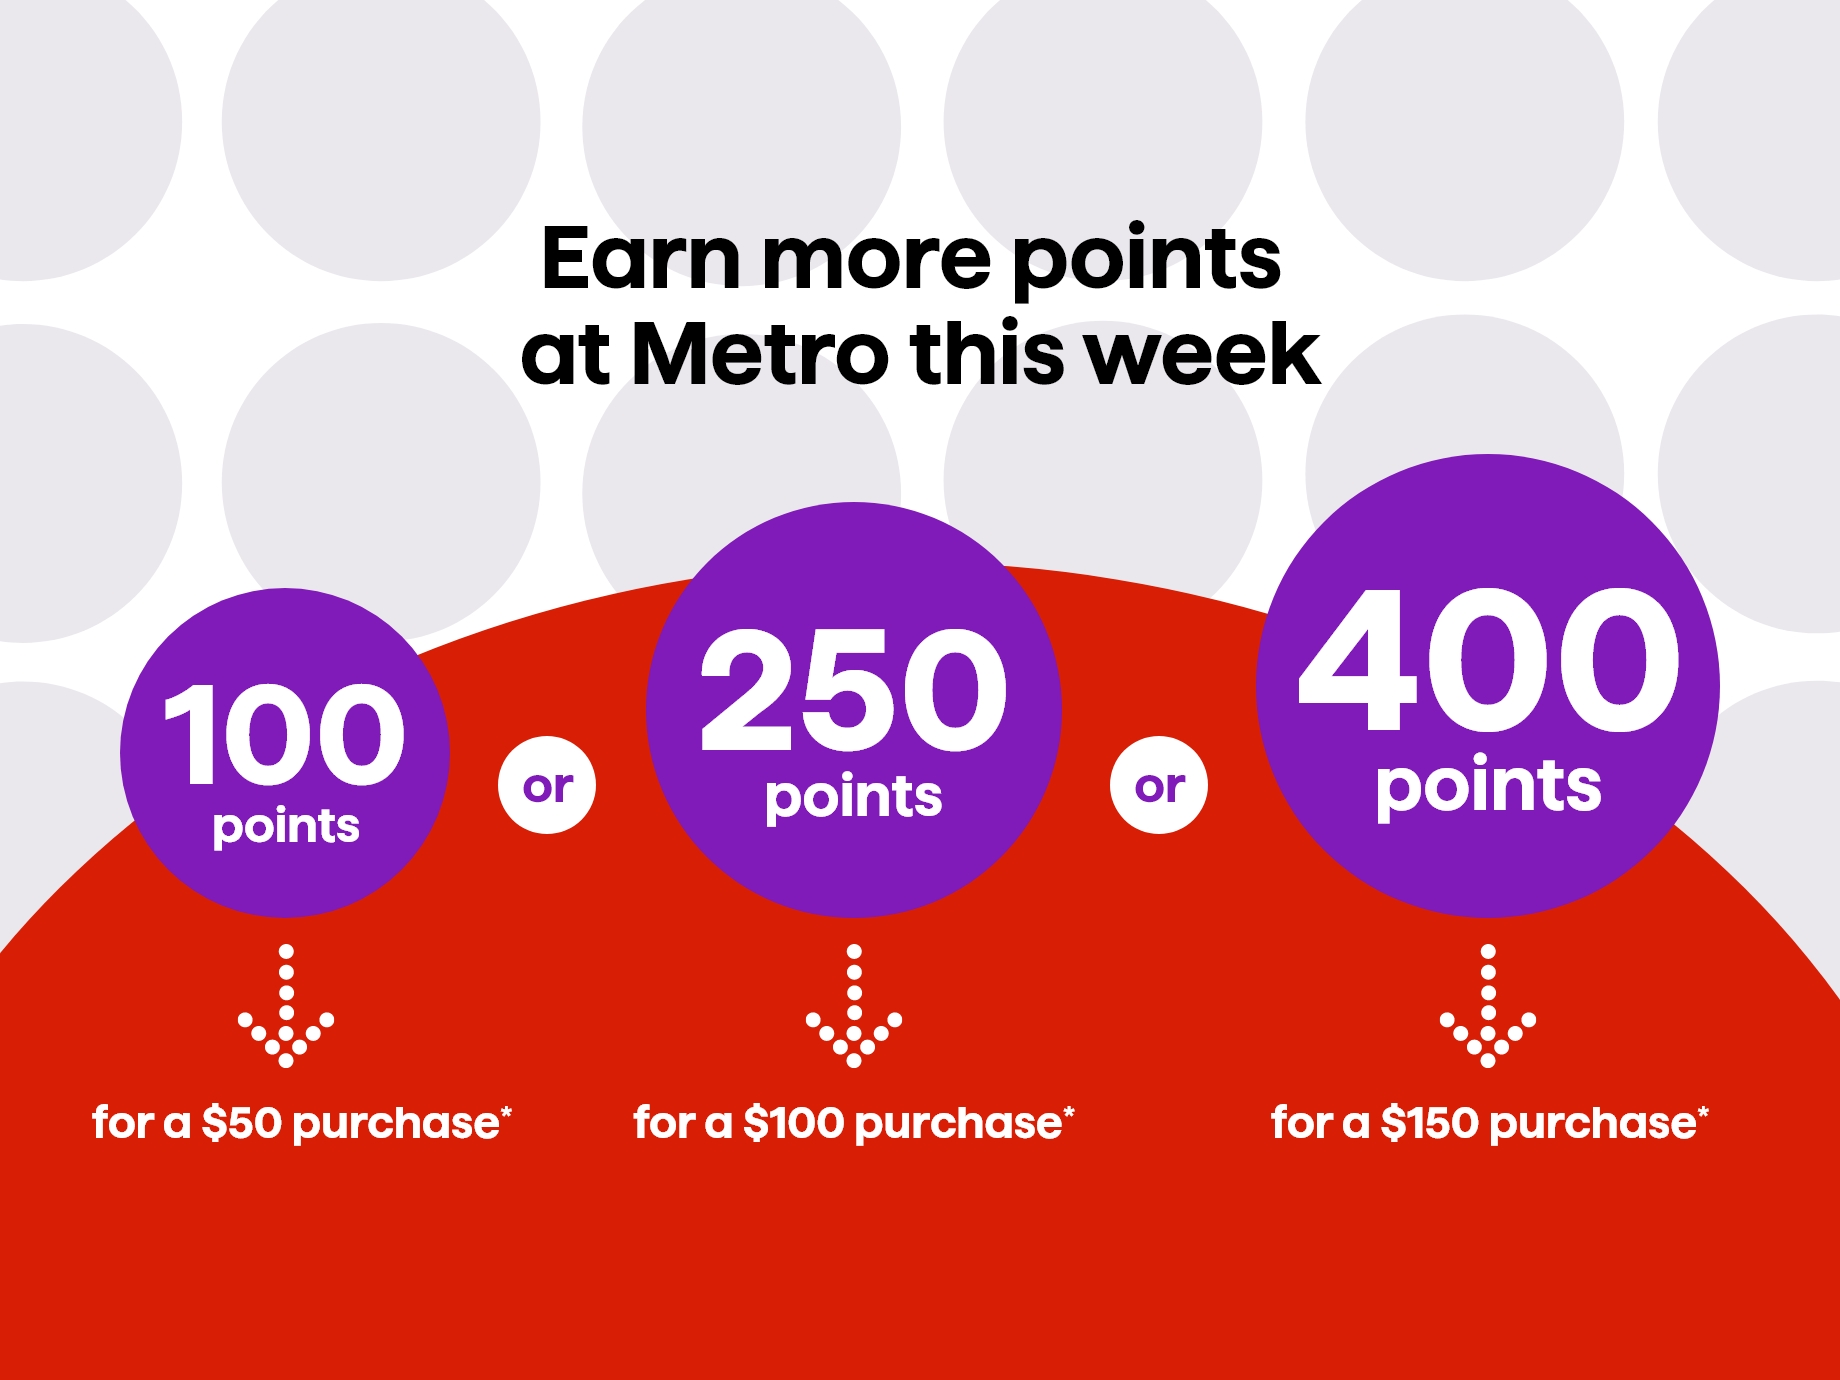 Earn more points at Metro this week